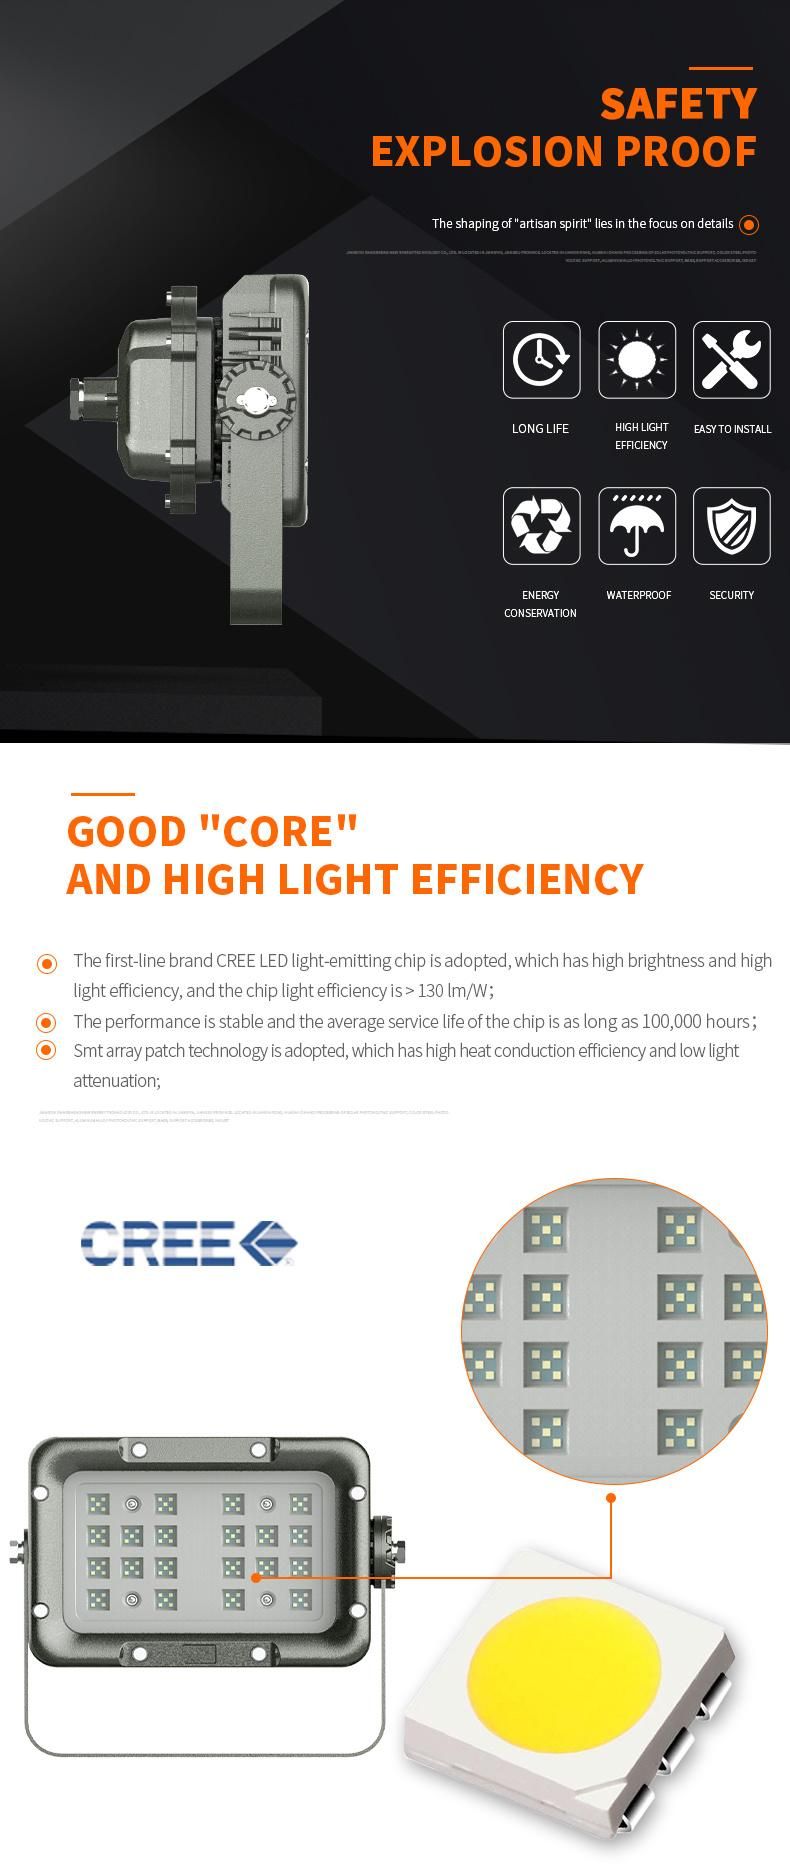 Atex 120 Lm/W Ik08 IP66 Outdoor Explosion Proof LED Floodlight 100W Industrial Exproof Light